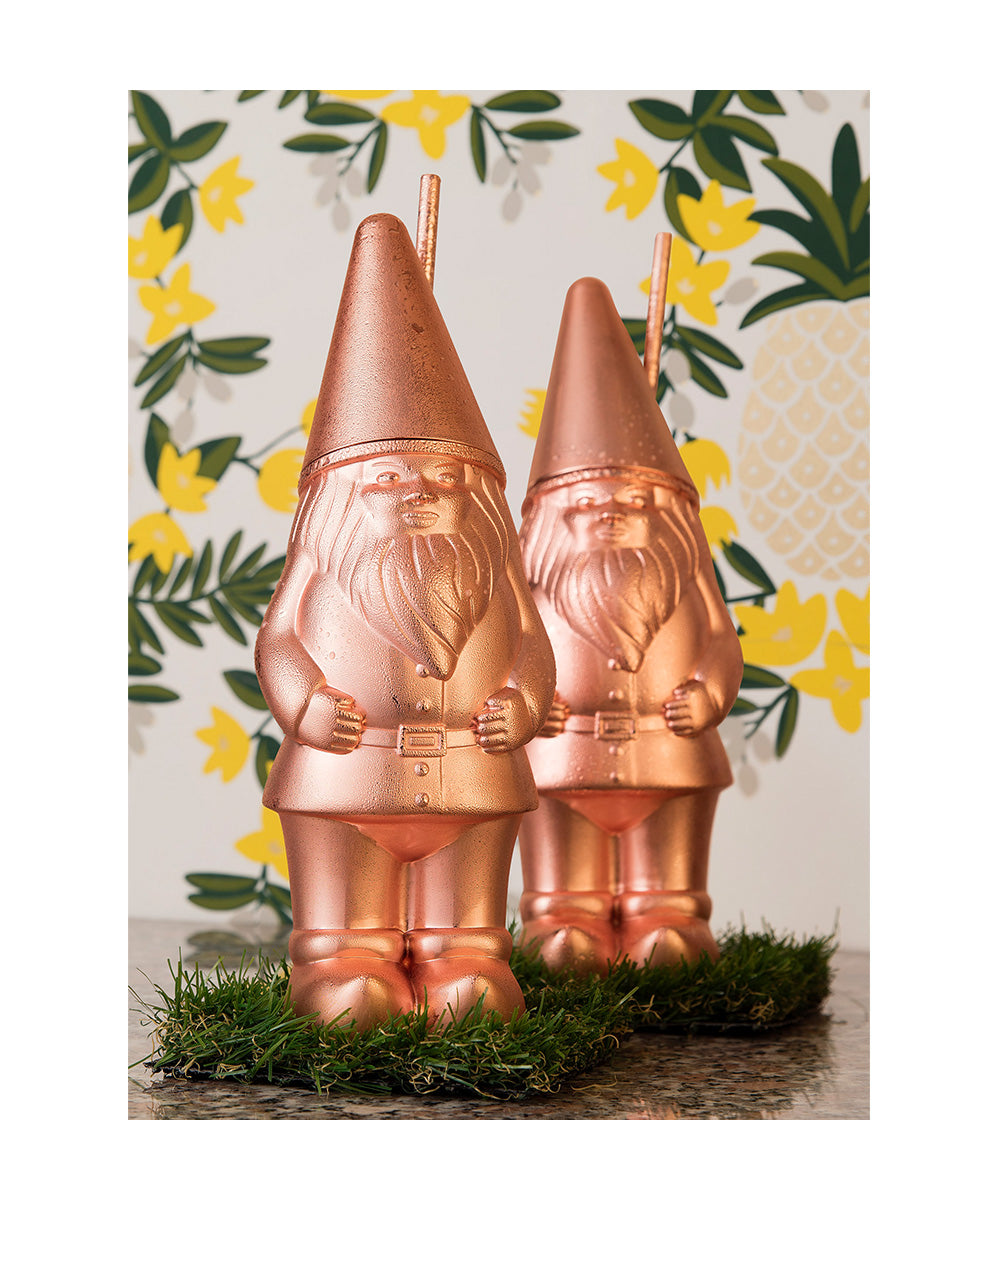 Absolut Elyx Gift Set with the Original Copper Gnome